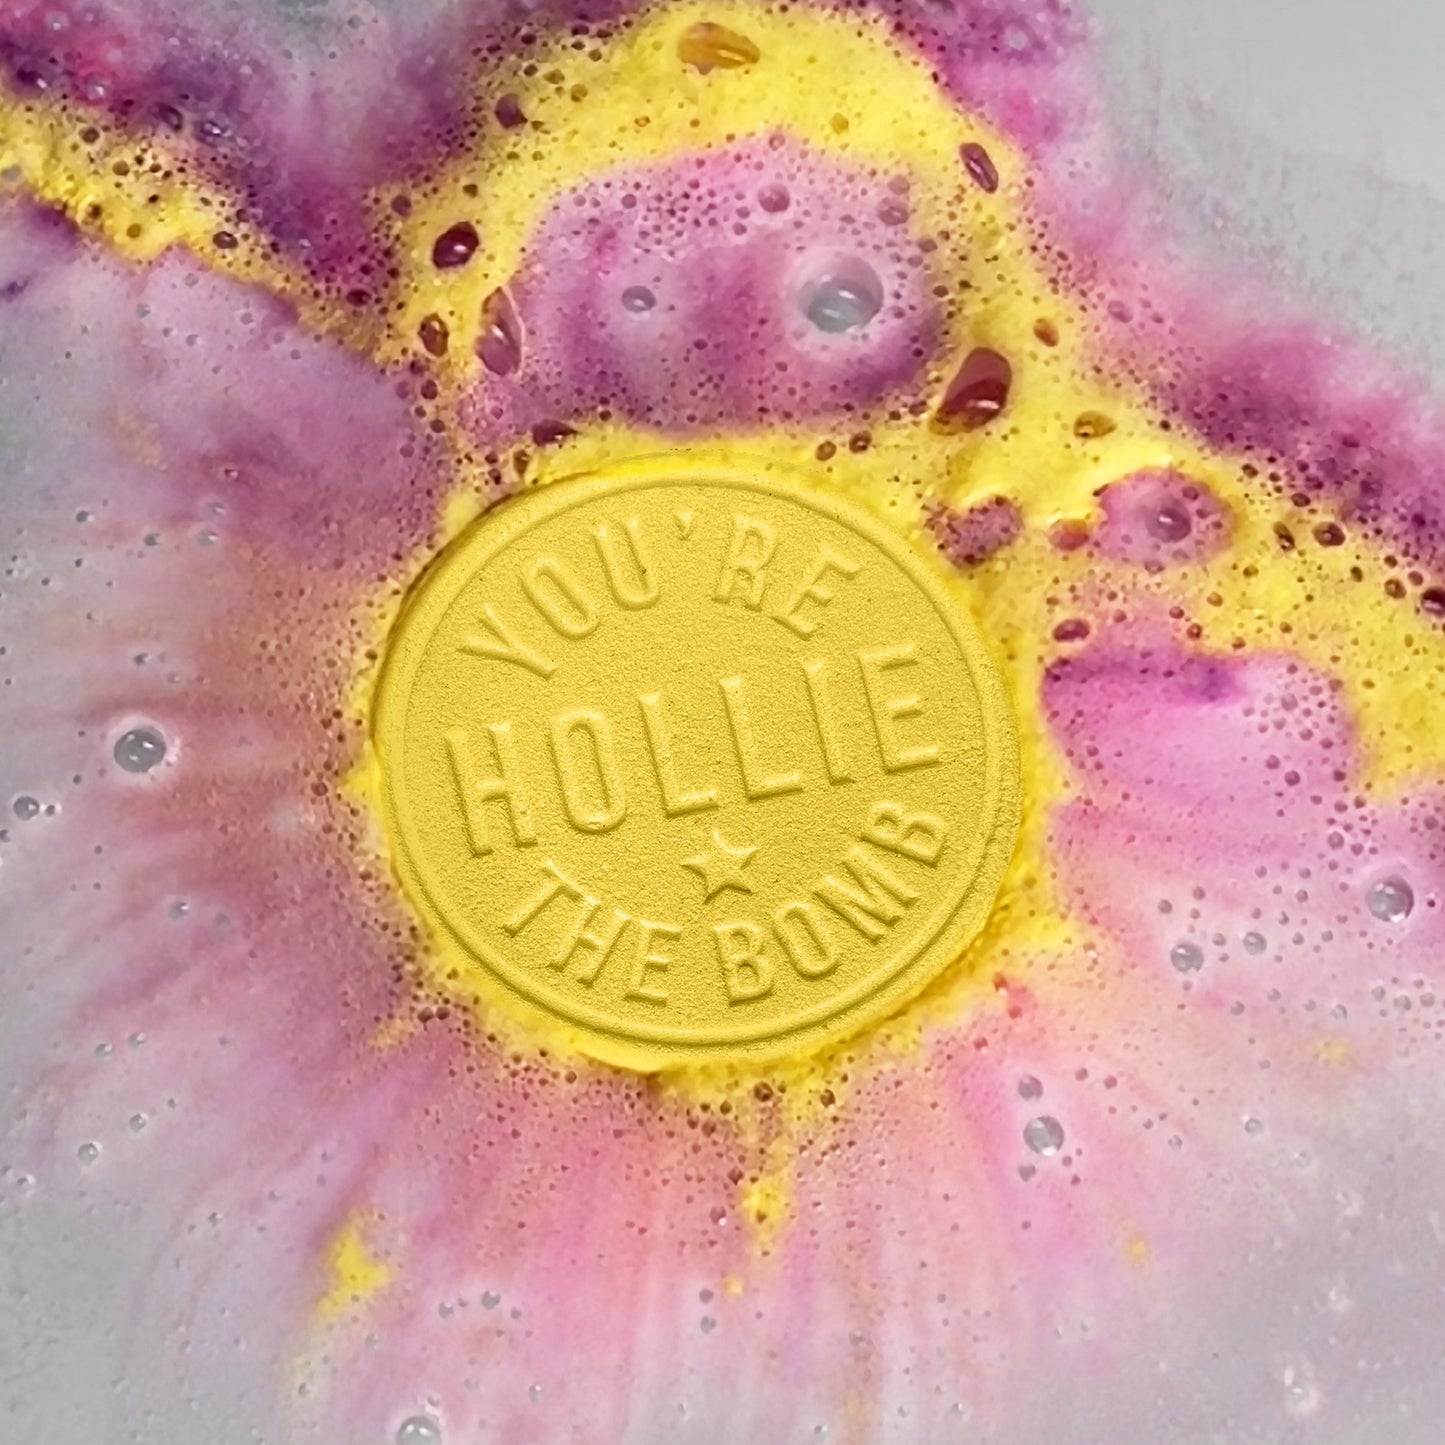 H&H Personalised Scented Bath Bombs - Evelyn